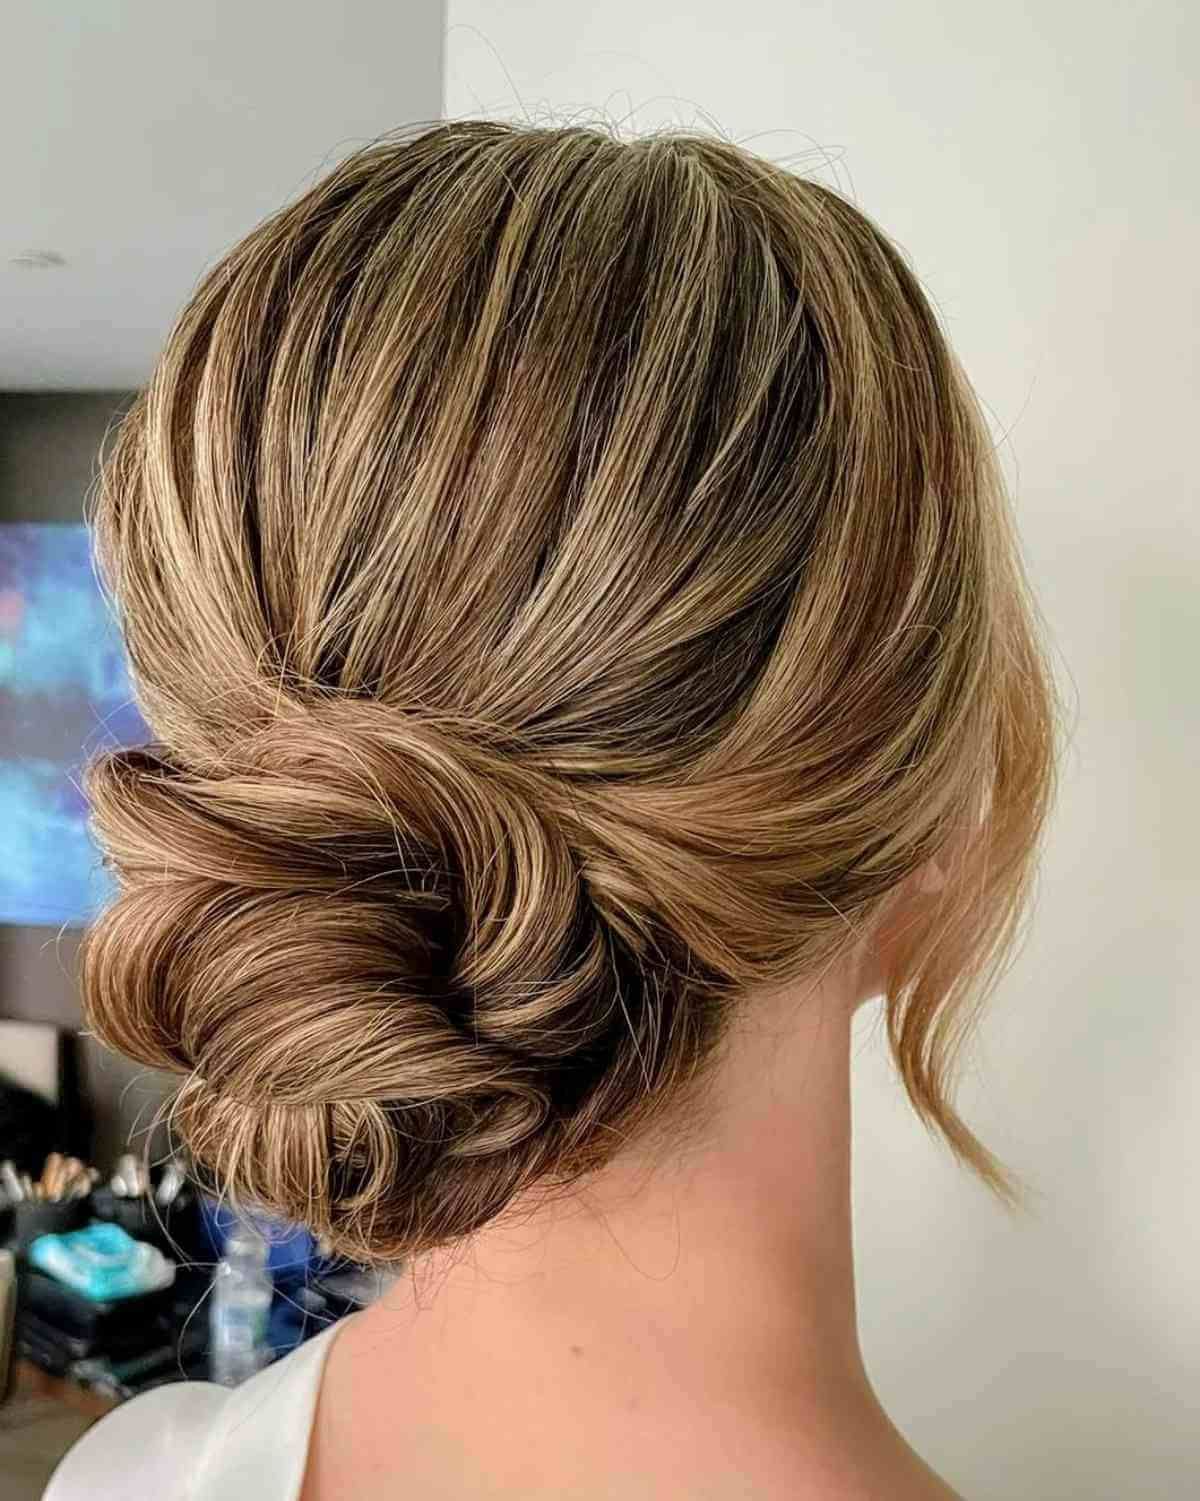 100+ Cute & Easy Shoulder Length Hair Ideas Within Most Recent Easy Hairstyles For Medium Length Hair (View 22 of 25)